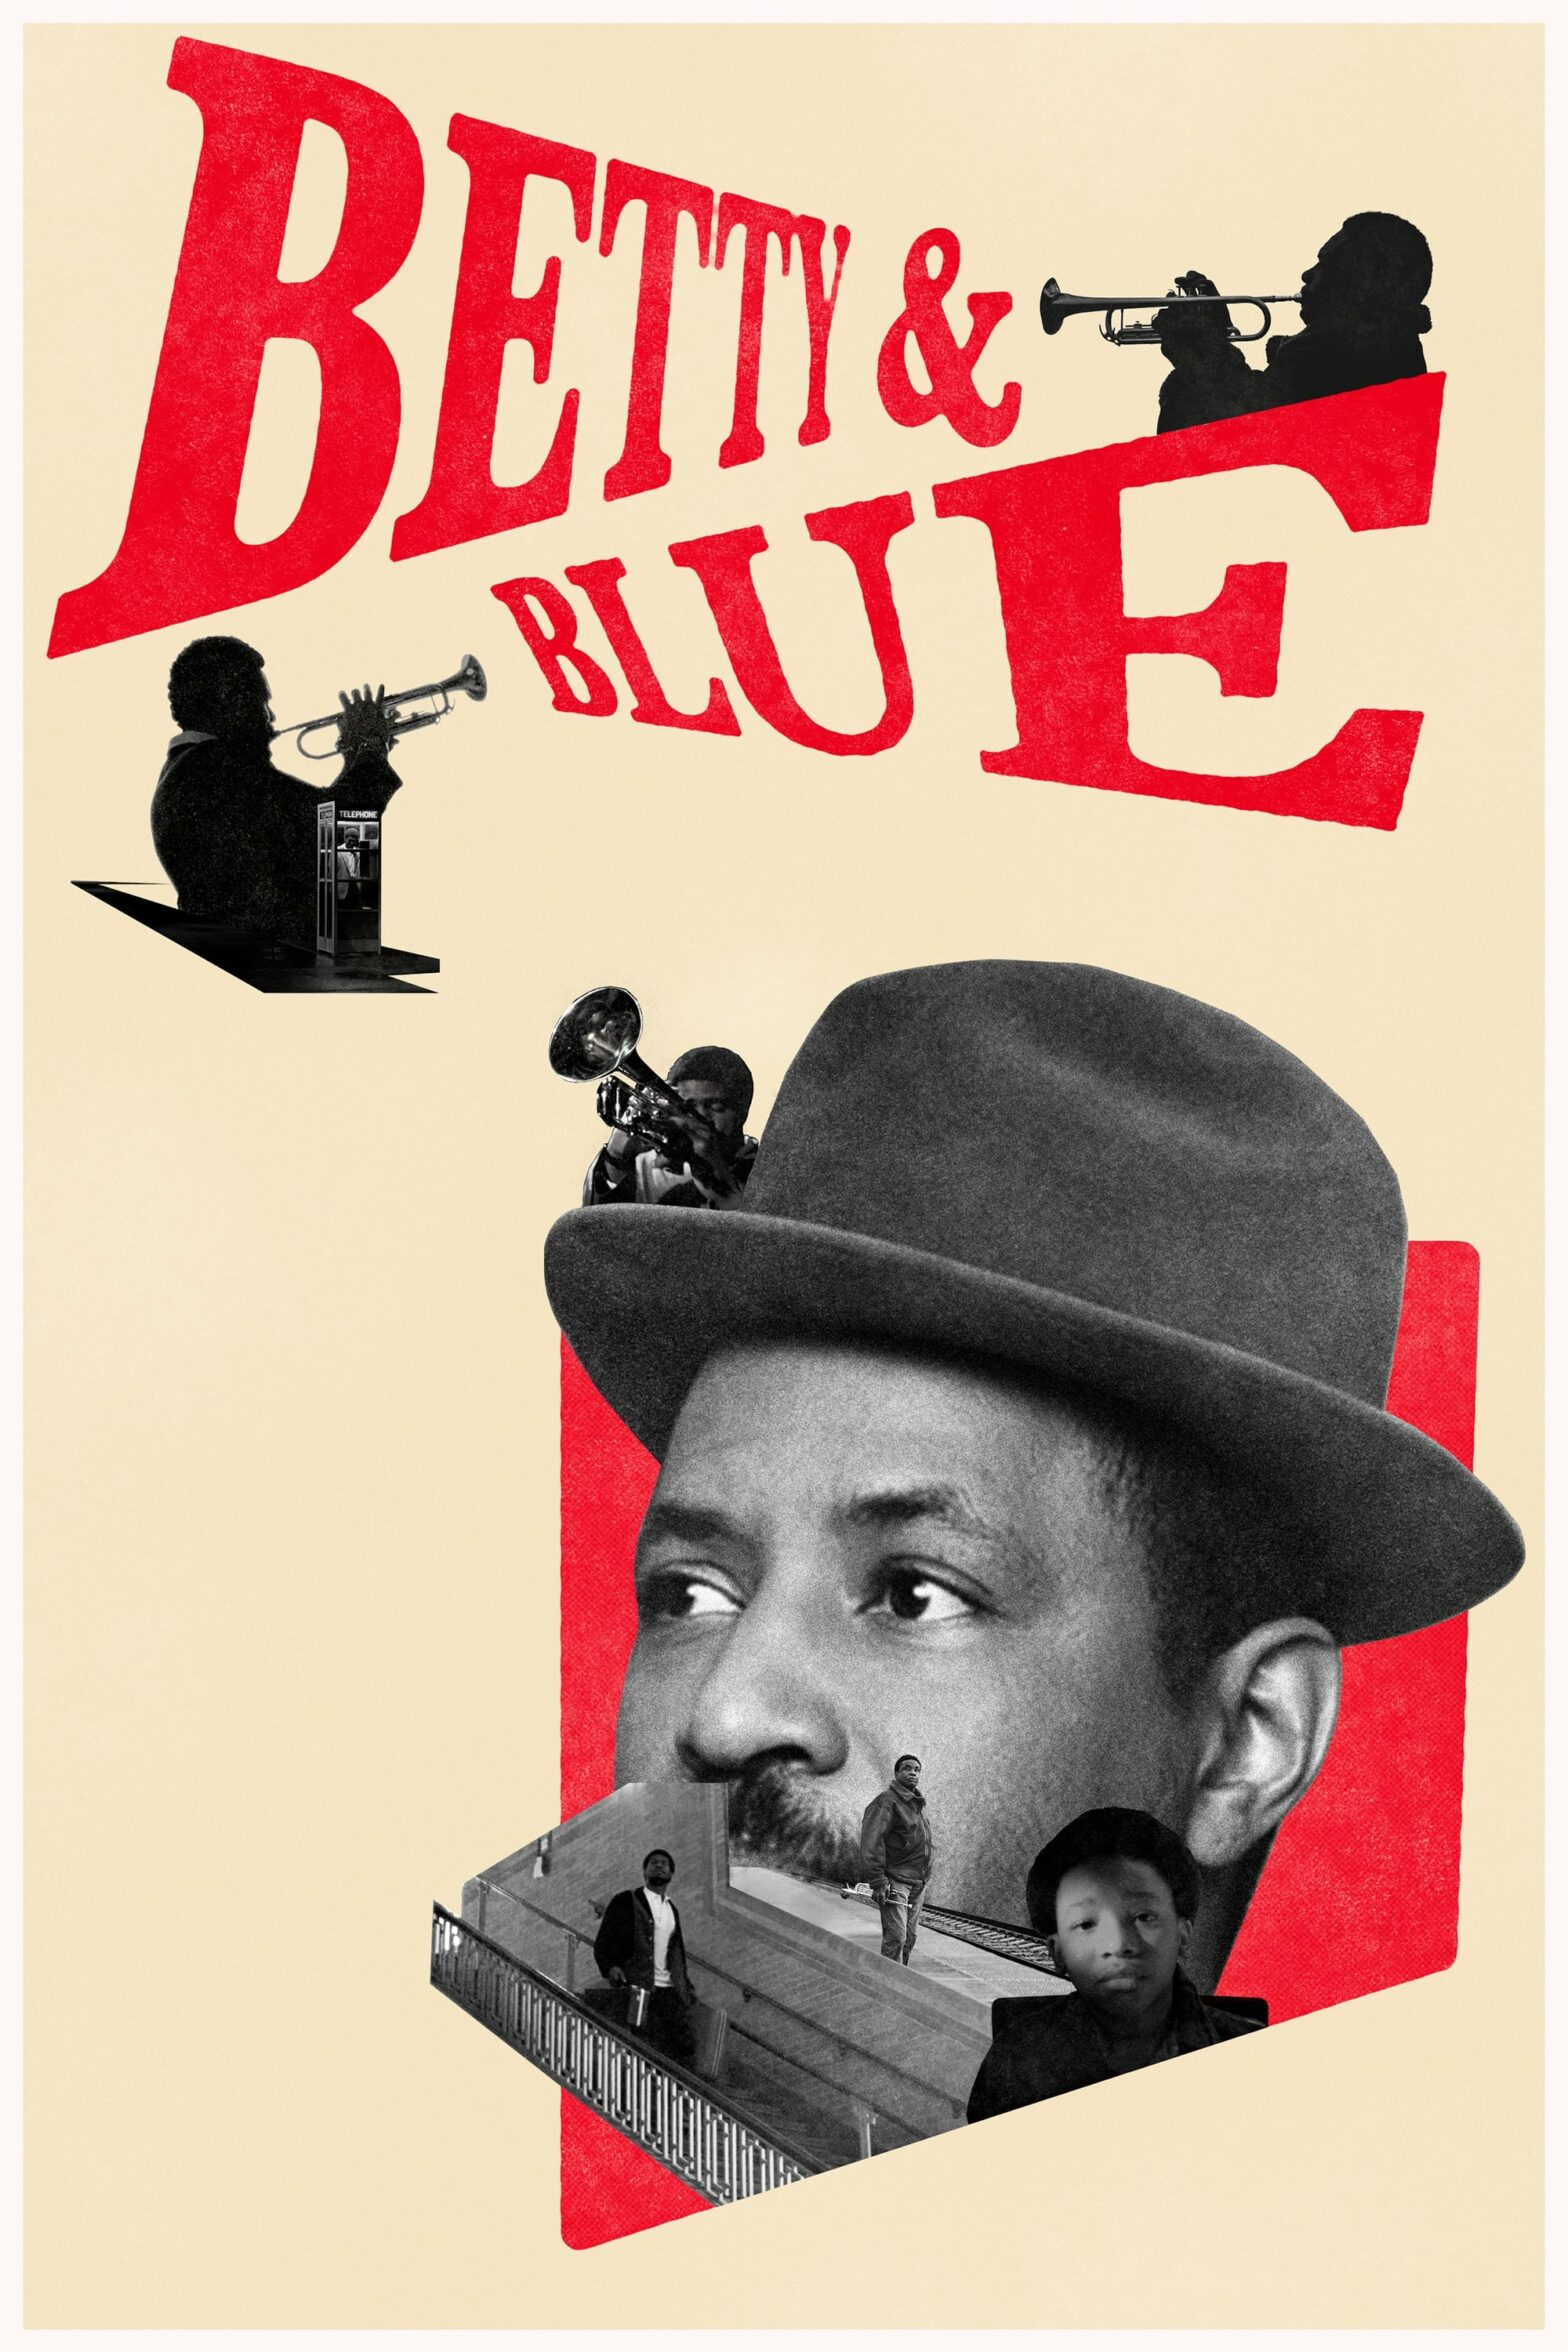 Poster for the movie "Betty & Blue"